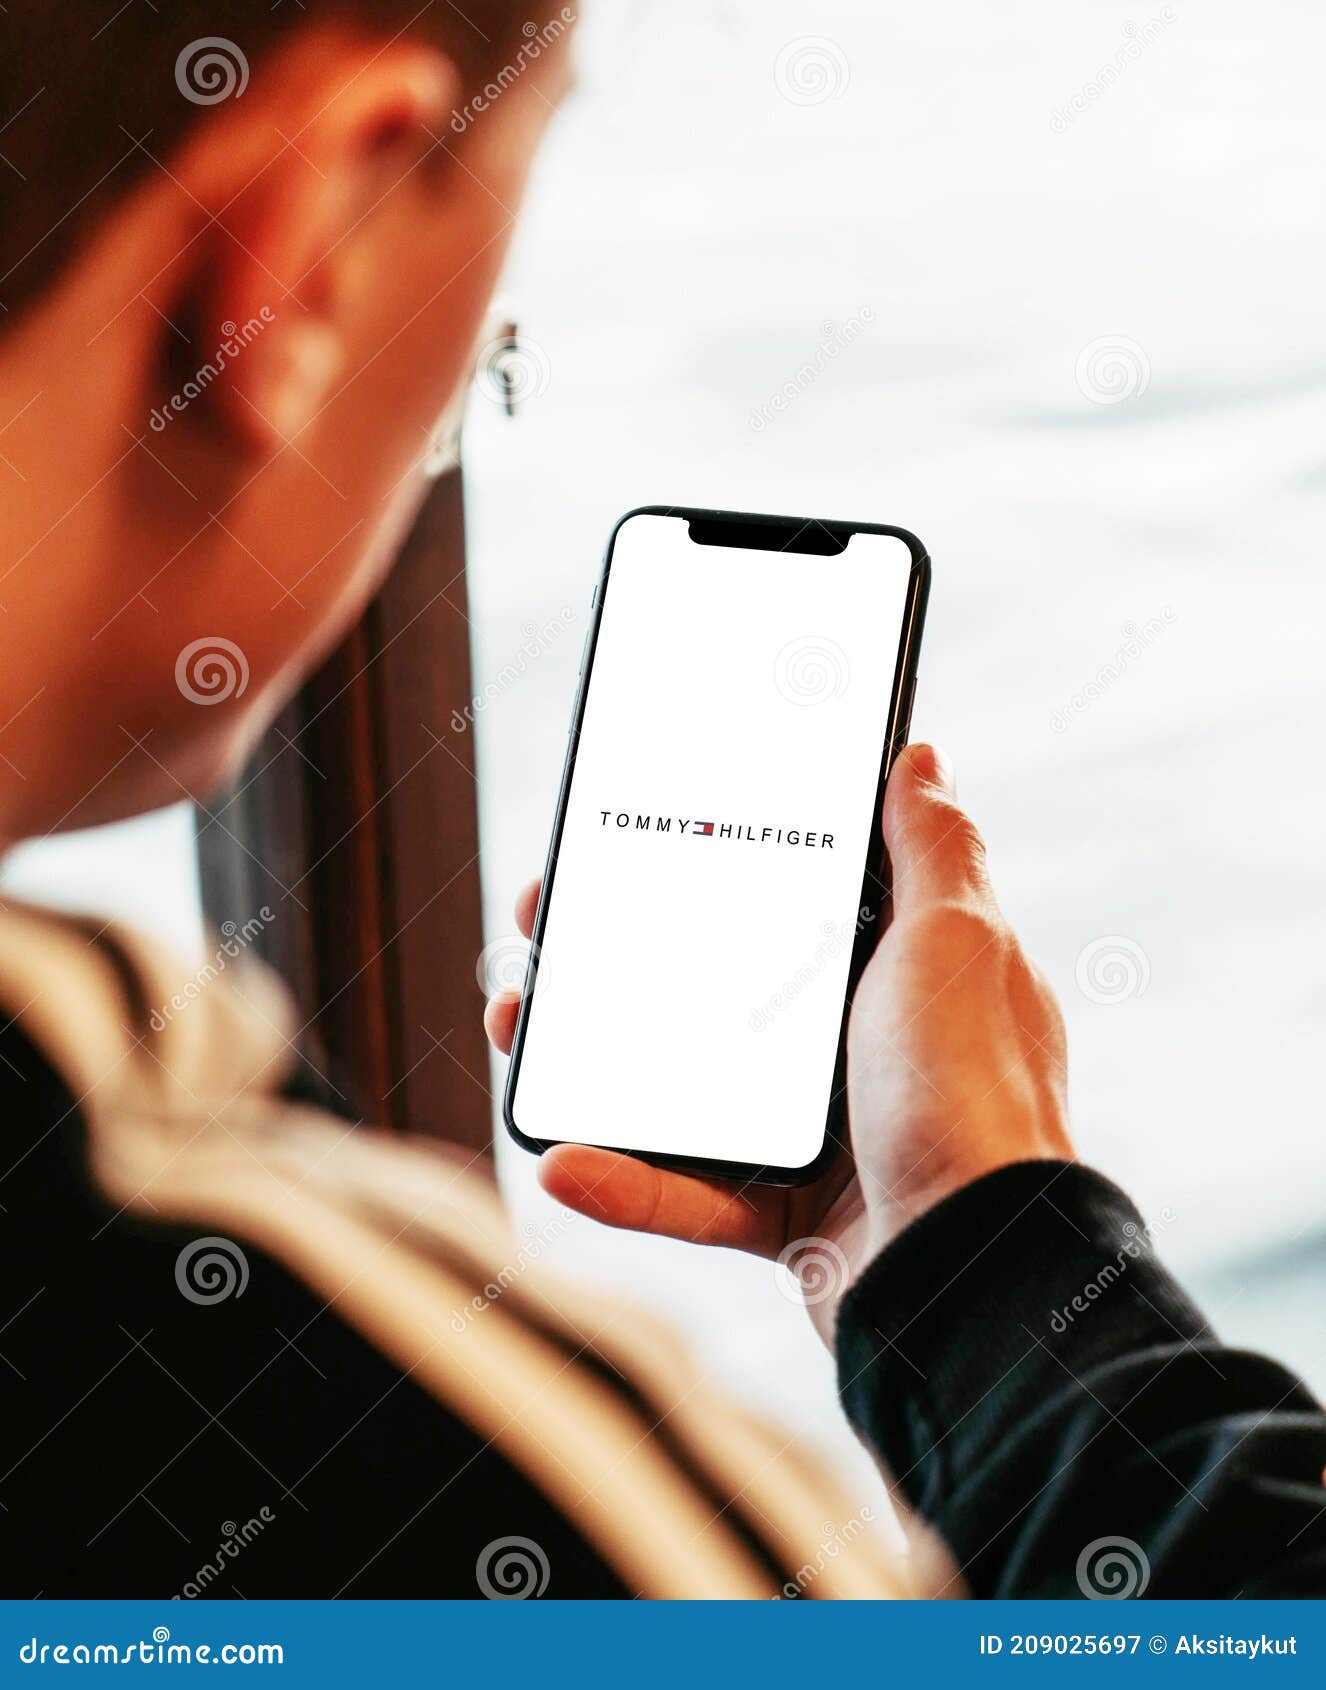 https://thumbs.dreamstime.com/z/tommy-hilfiger-iphone-hand-realistic-texture-thomas-jacob-h%C9%AAl%CB%88f%C9%AAg%C9%99r-born-march-american-fashion-designer-209025697.jpg